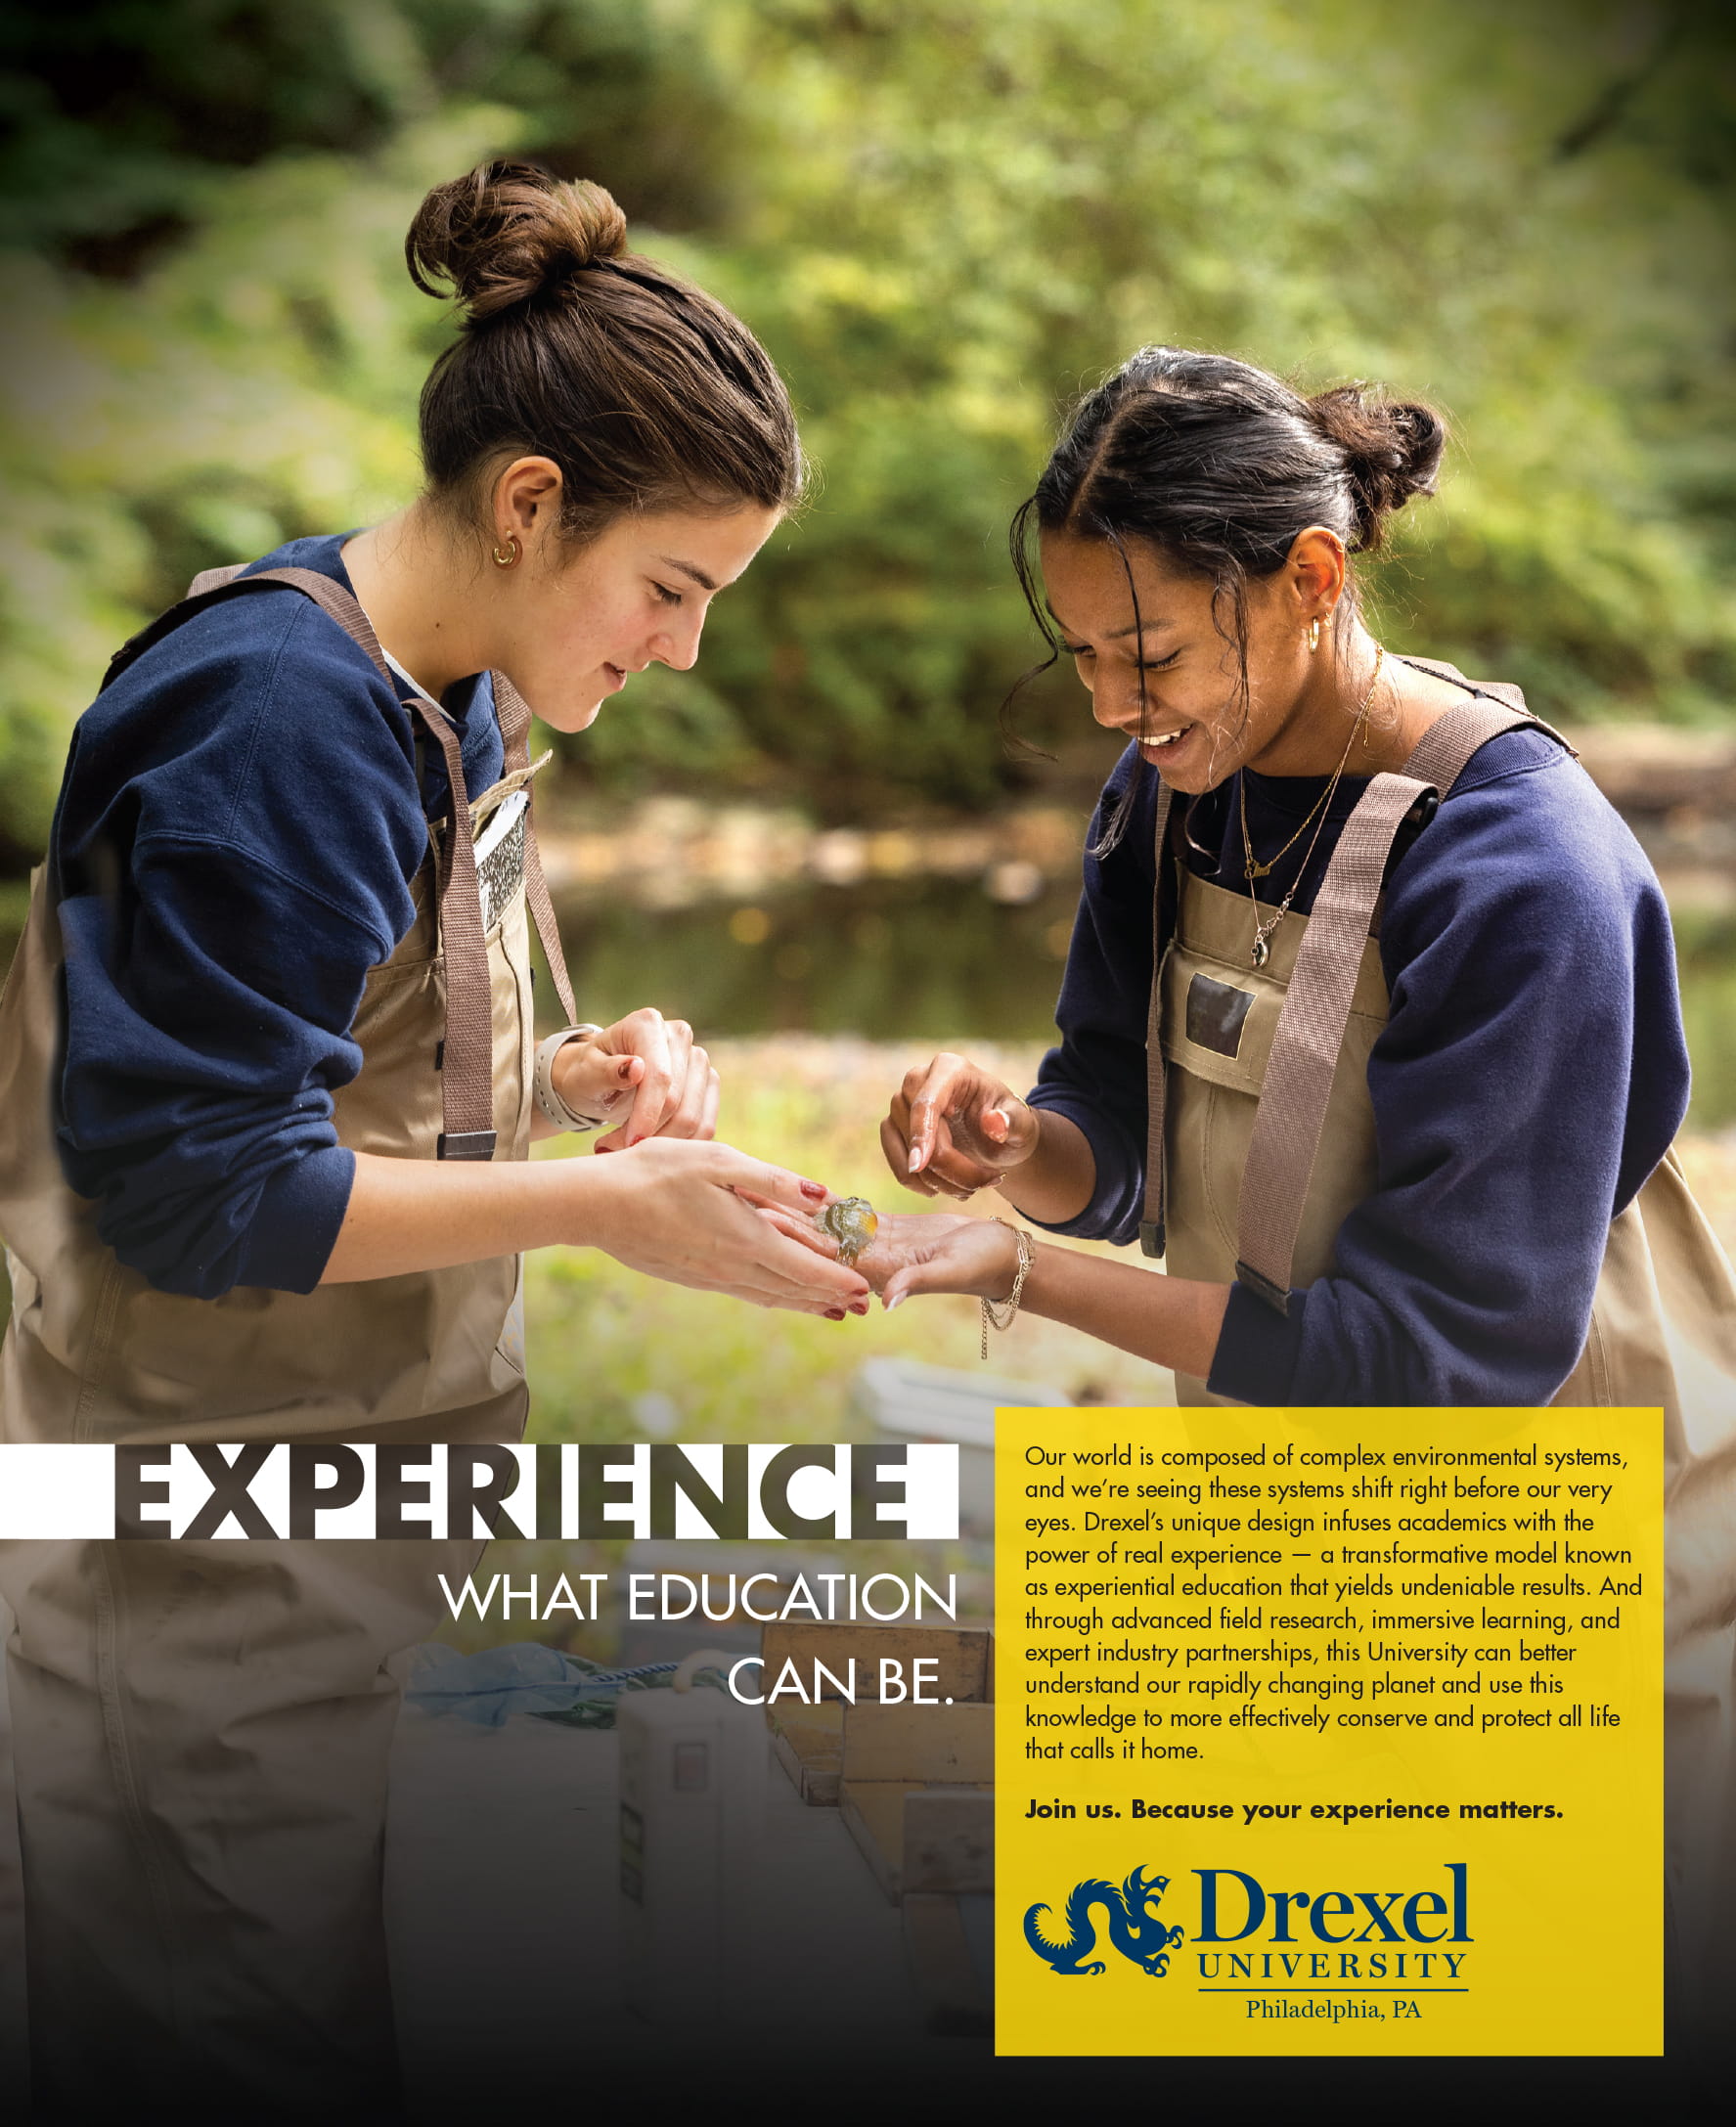 New York Times ad depicting two Drexel Environmental science students studying a fish outdoors